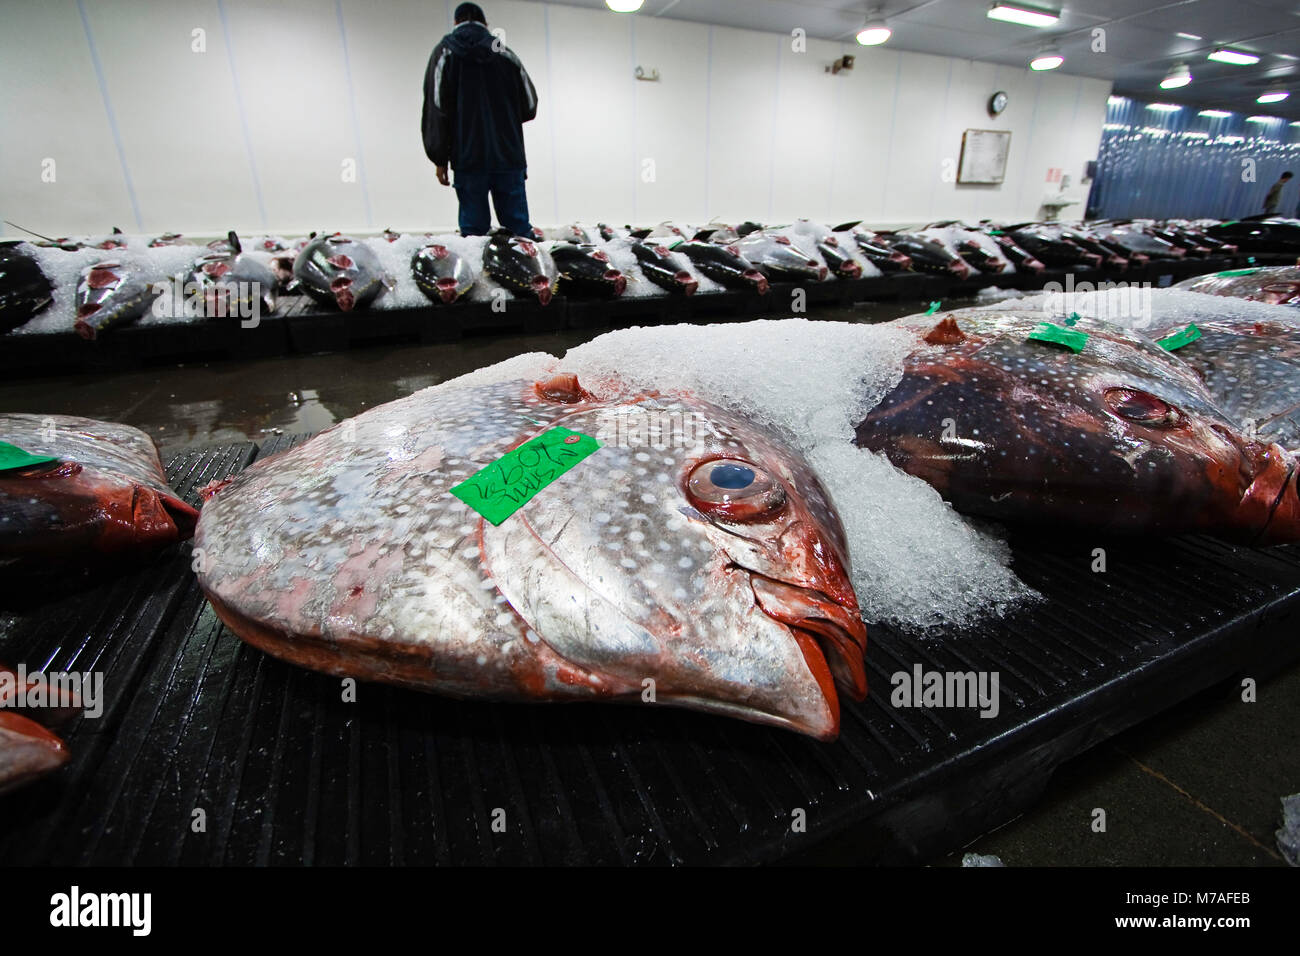 An early morning fish auction on Oahu's waterfront has Opah or moonfish, Lampris regius, for sale, Hawaii. Stock Photo